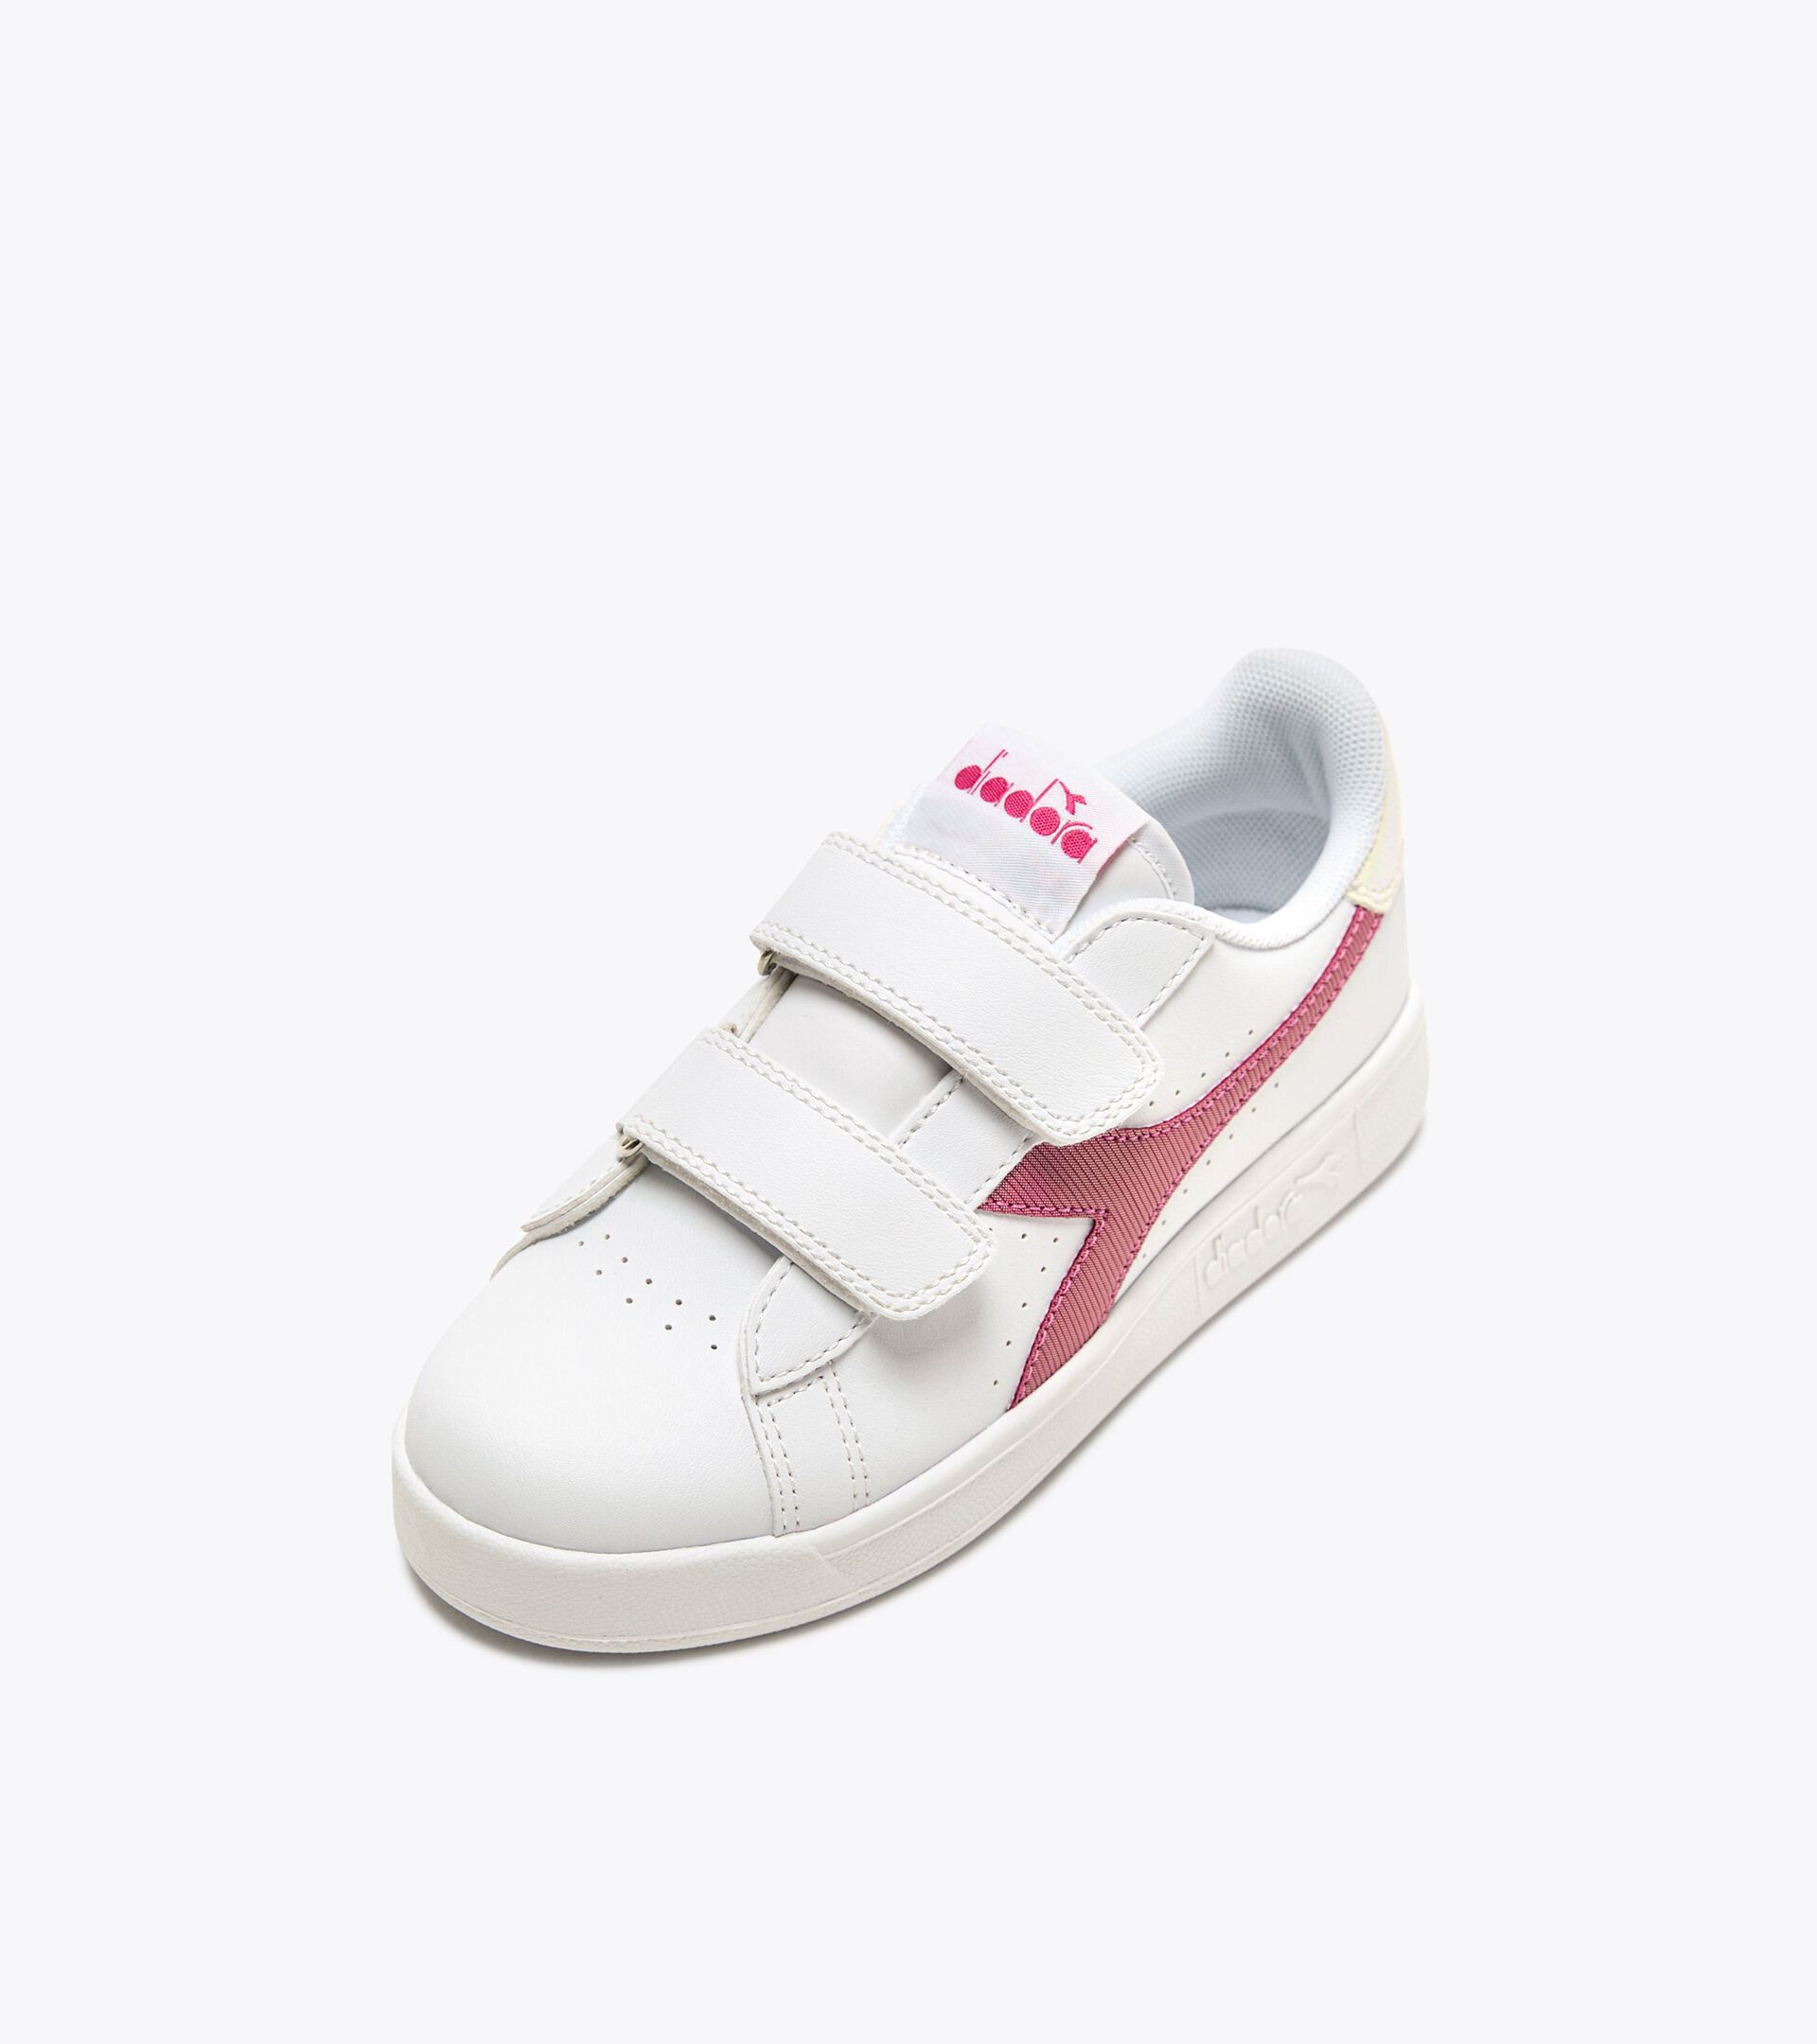 Sports shoes - Kids 4-8 years GAME P PS GIRL WHITE/CLARET RED - Diadora